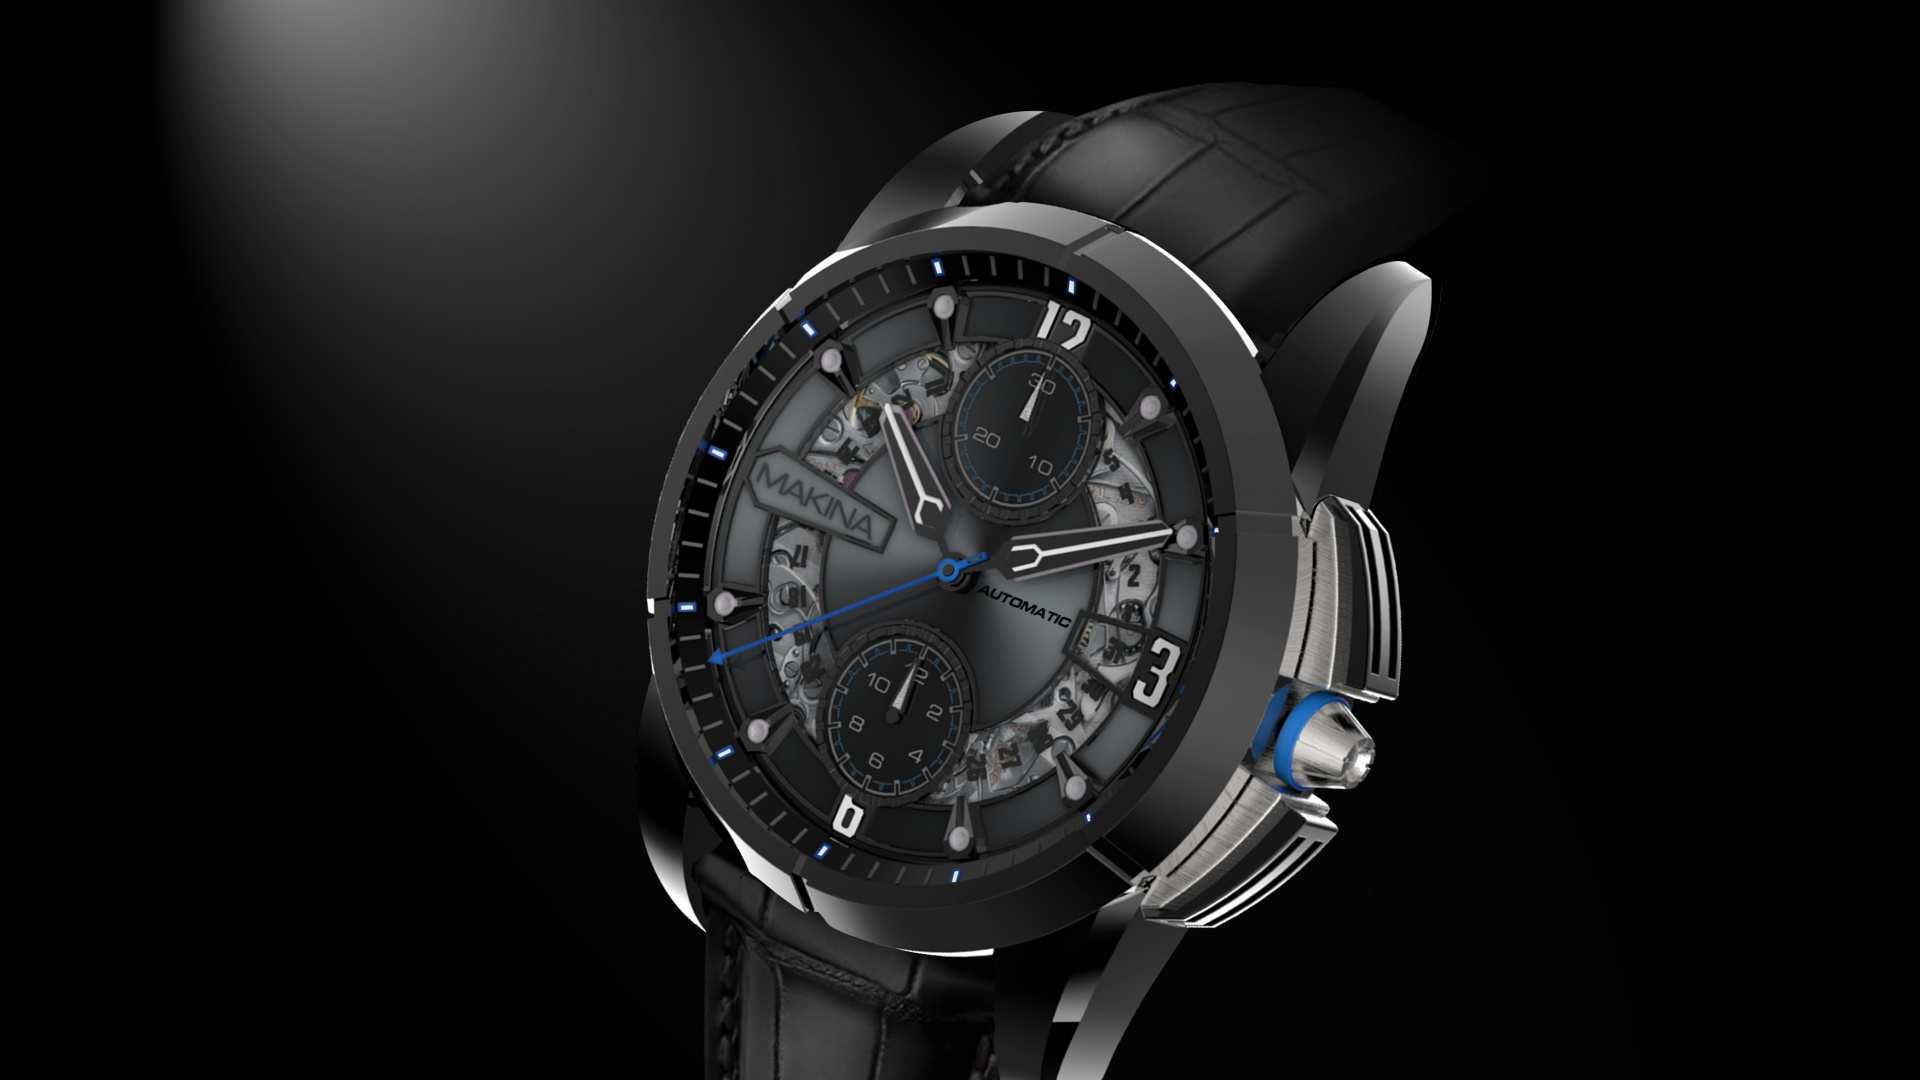 Silver and Blue Chronograph Watch. Wallpaper in 1920x1080 Resolution